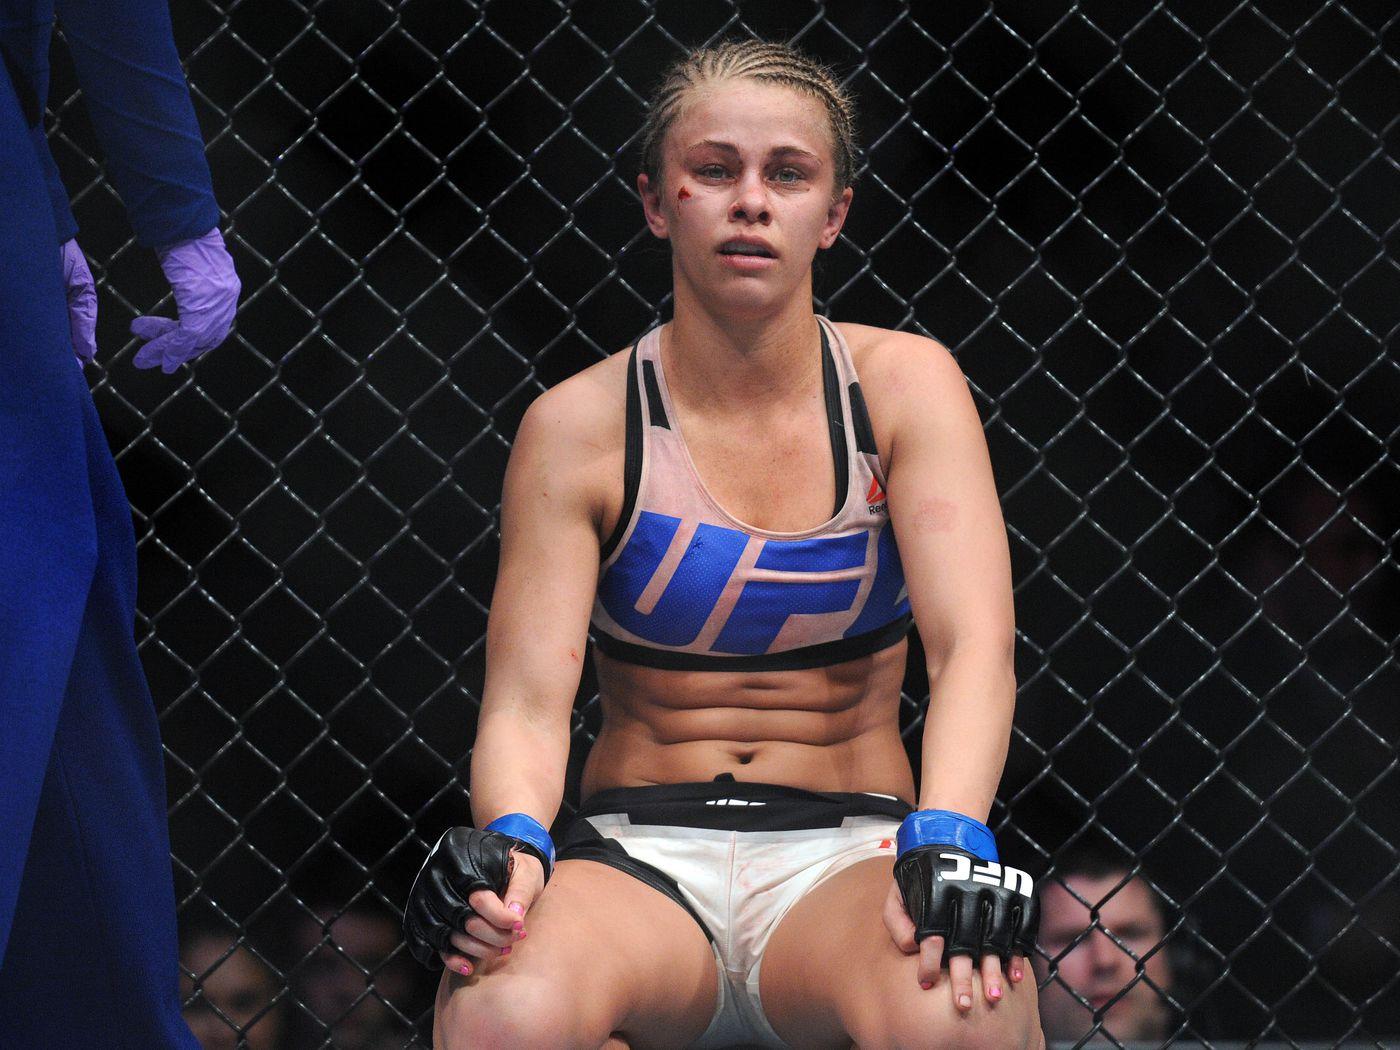 Video: UFC's Paige VanZant reveals bullying past got her into MMA